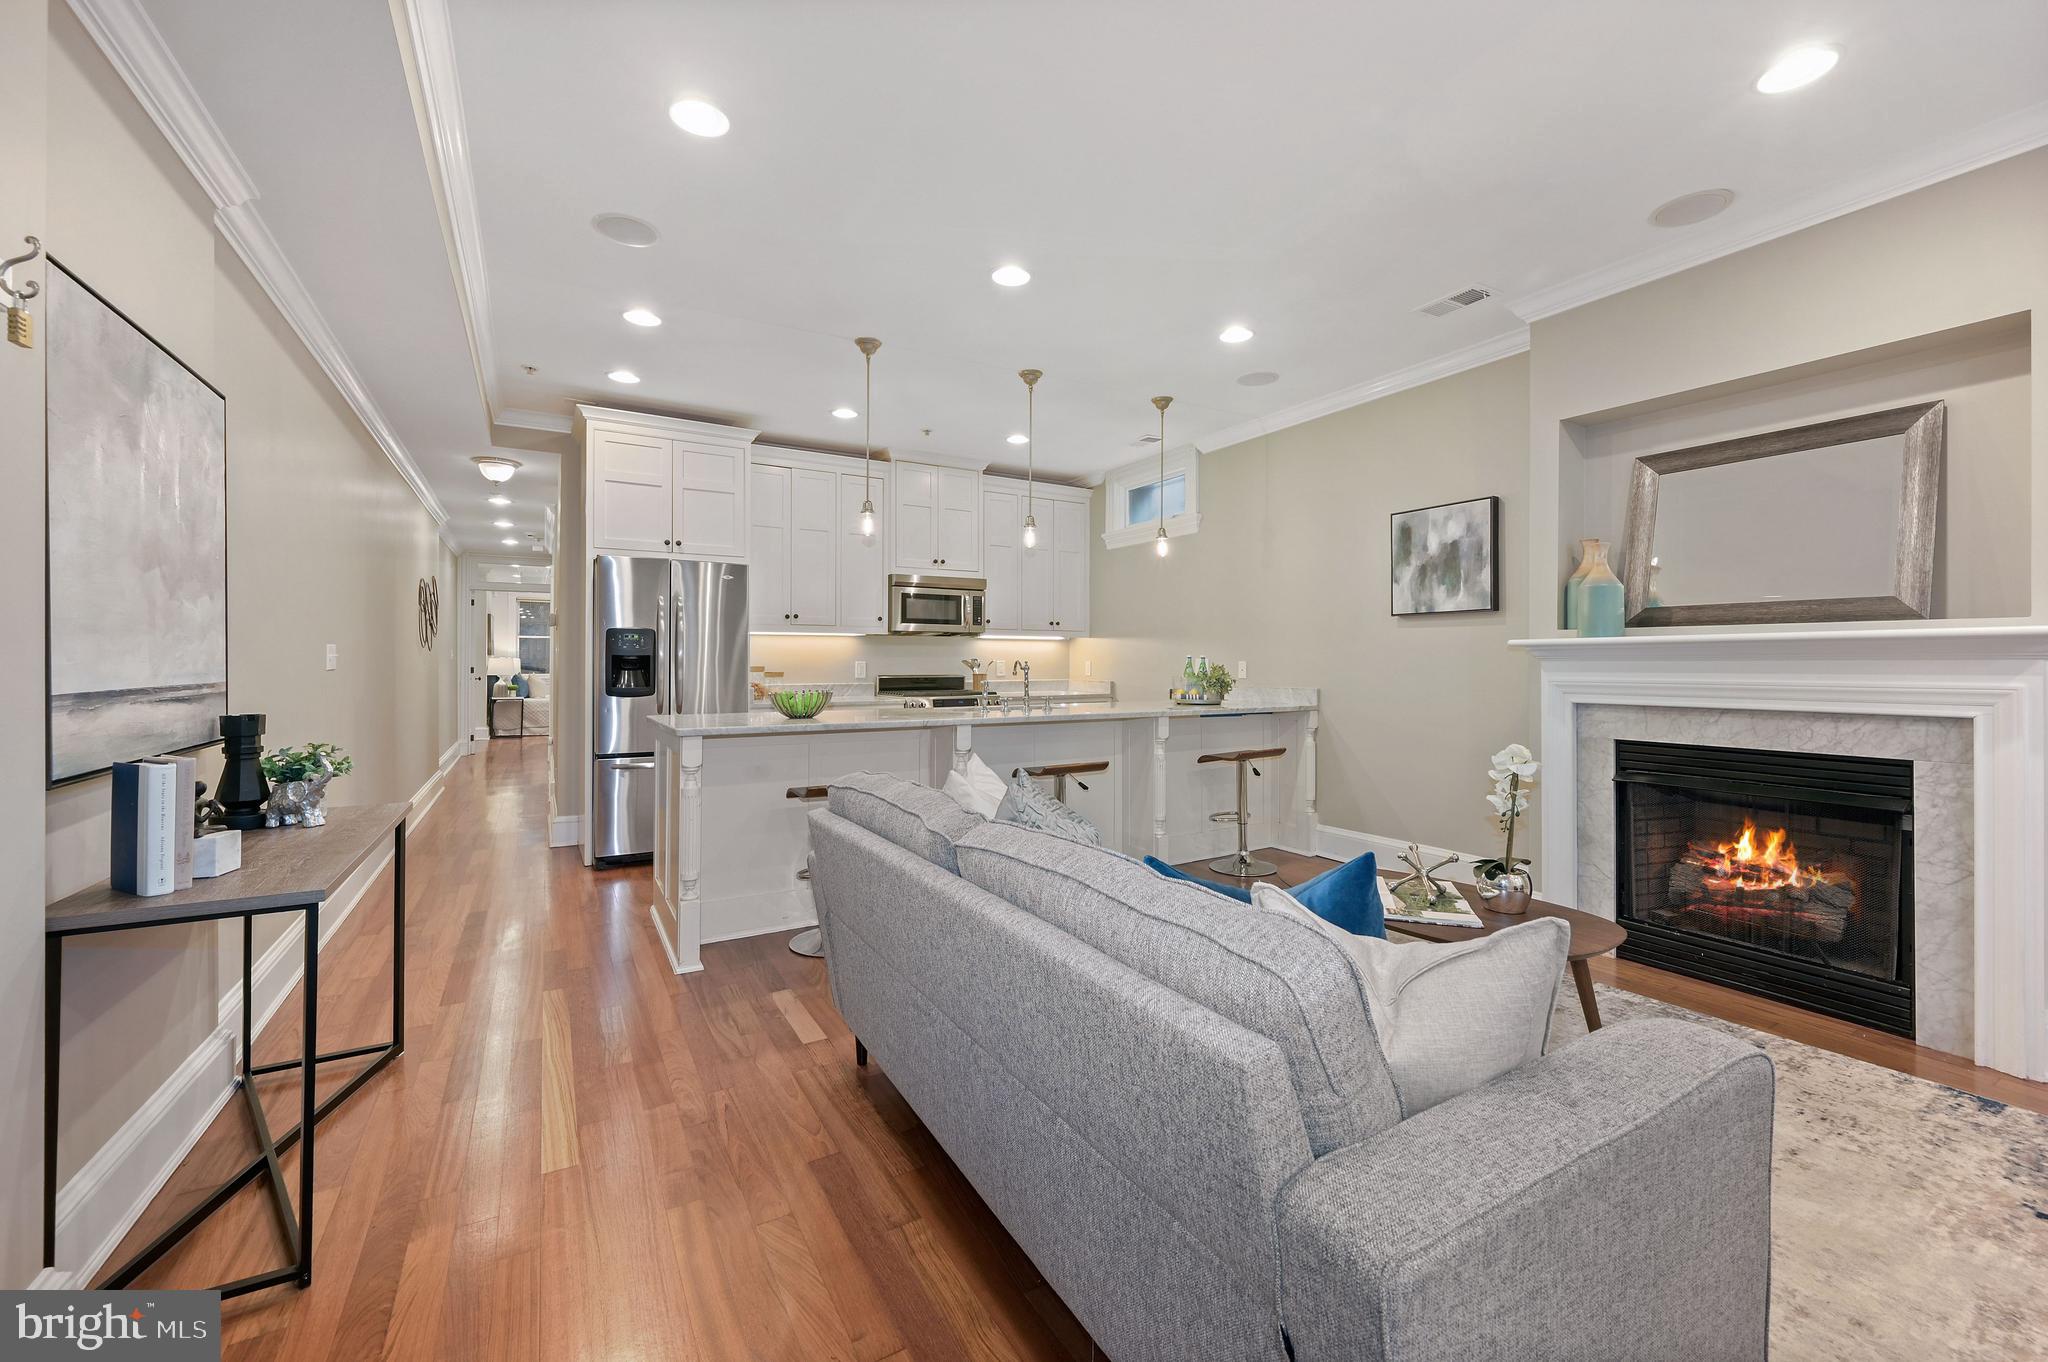 a living room with stainless steel appliances furniture a fireplace and a view of kitchen